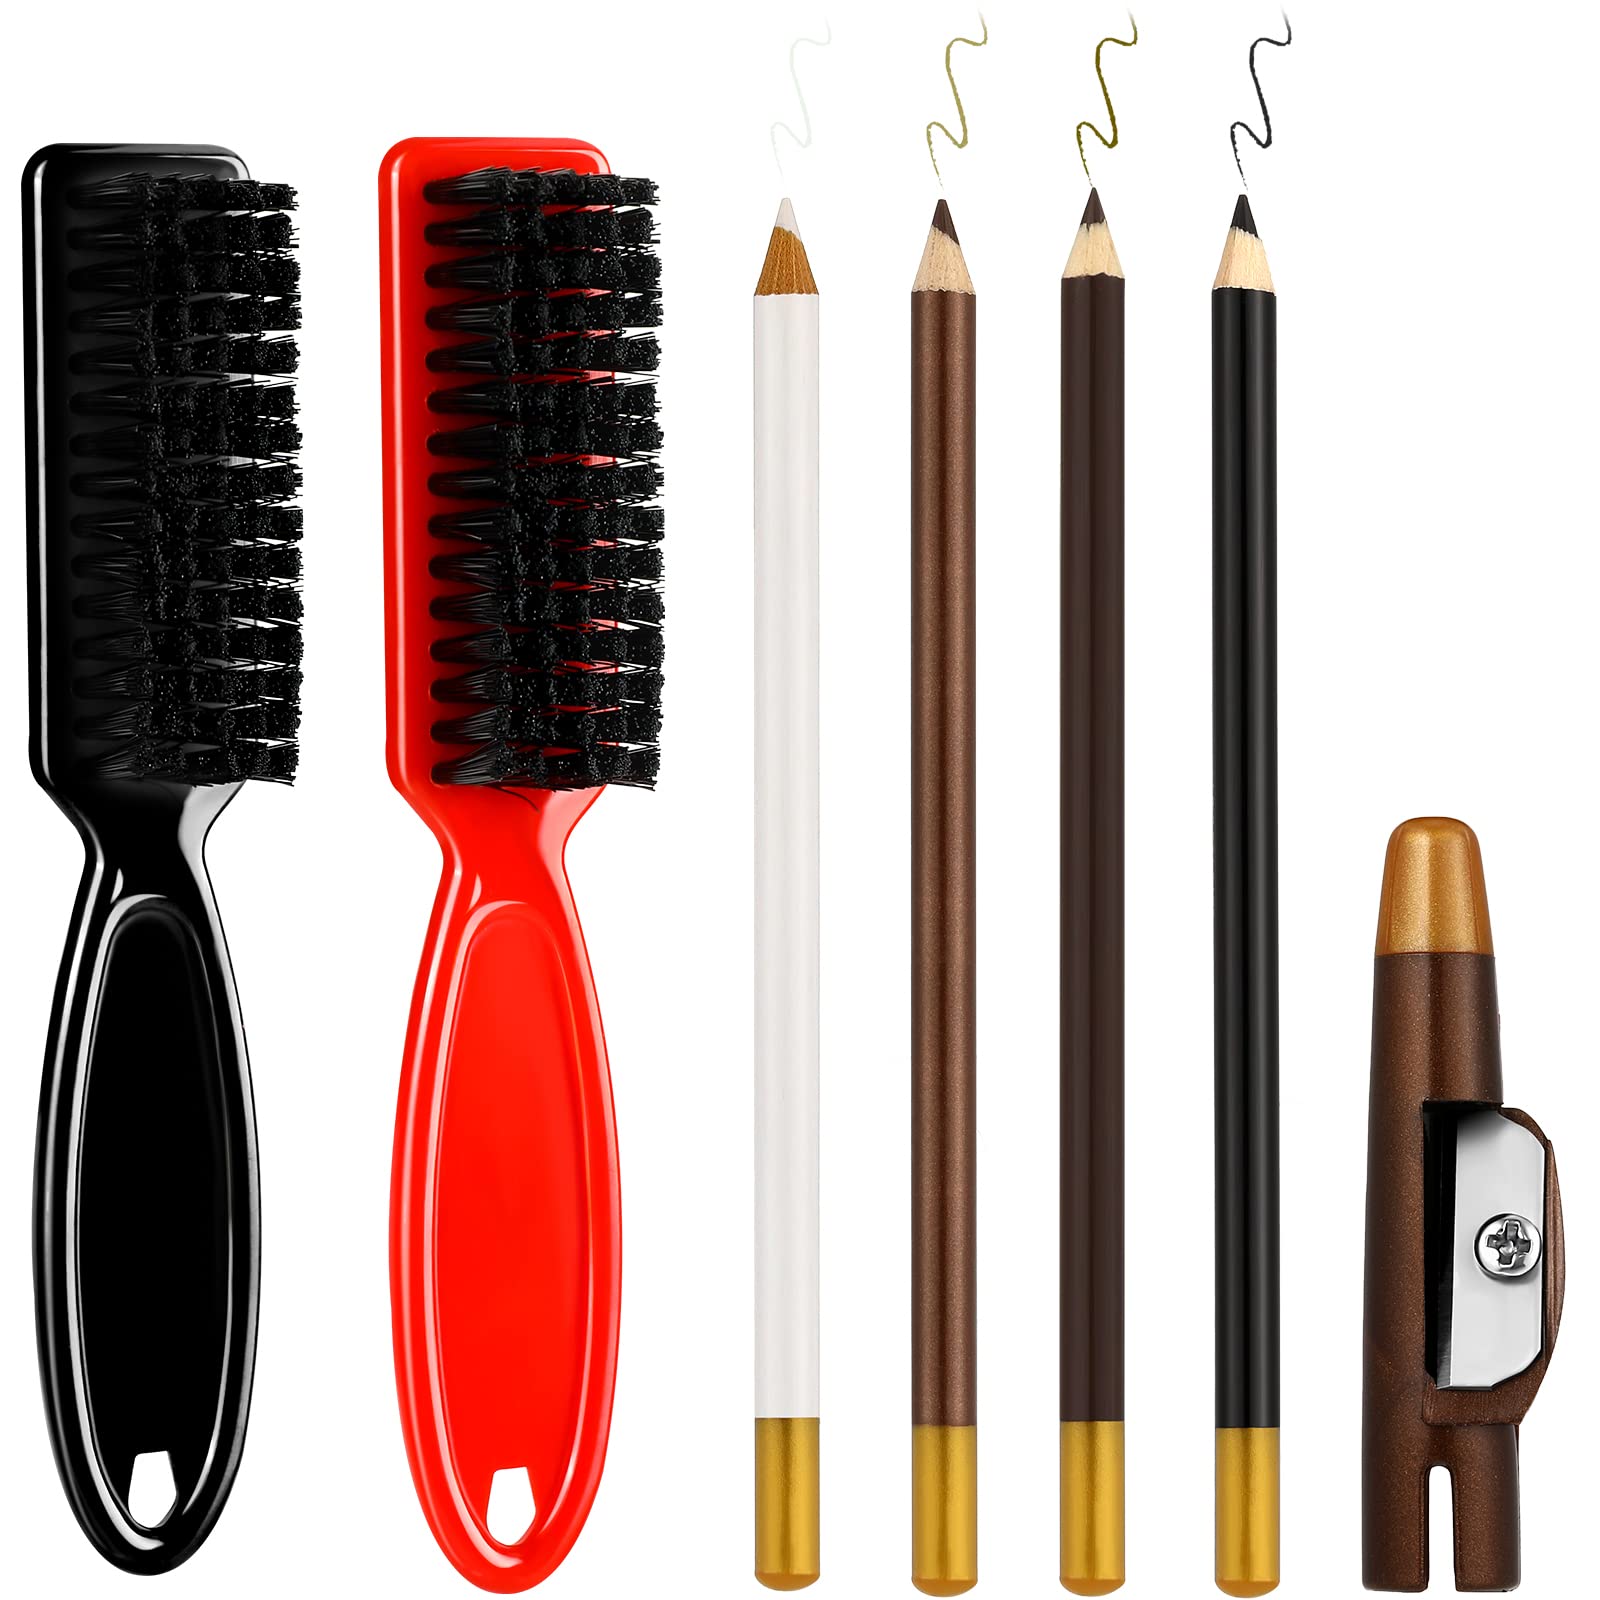 6 Pieces Barber Pencil Set 4 Barber Pencils with Built-in Sharpener and 2  Barber Blade